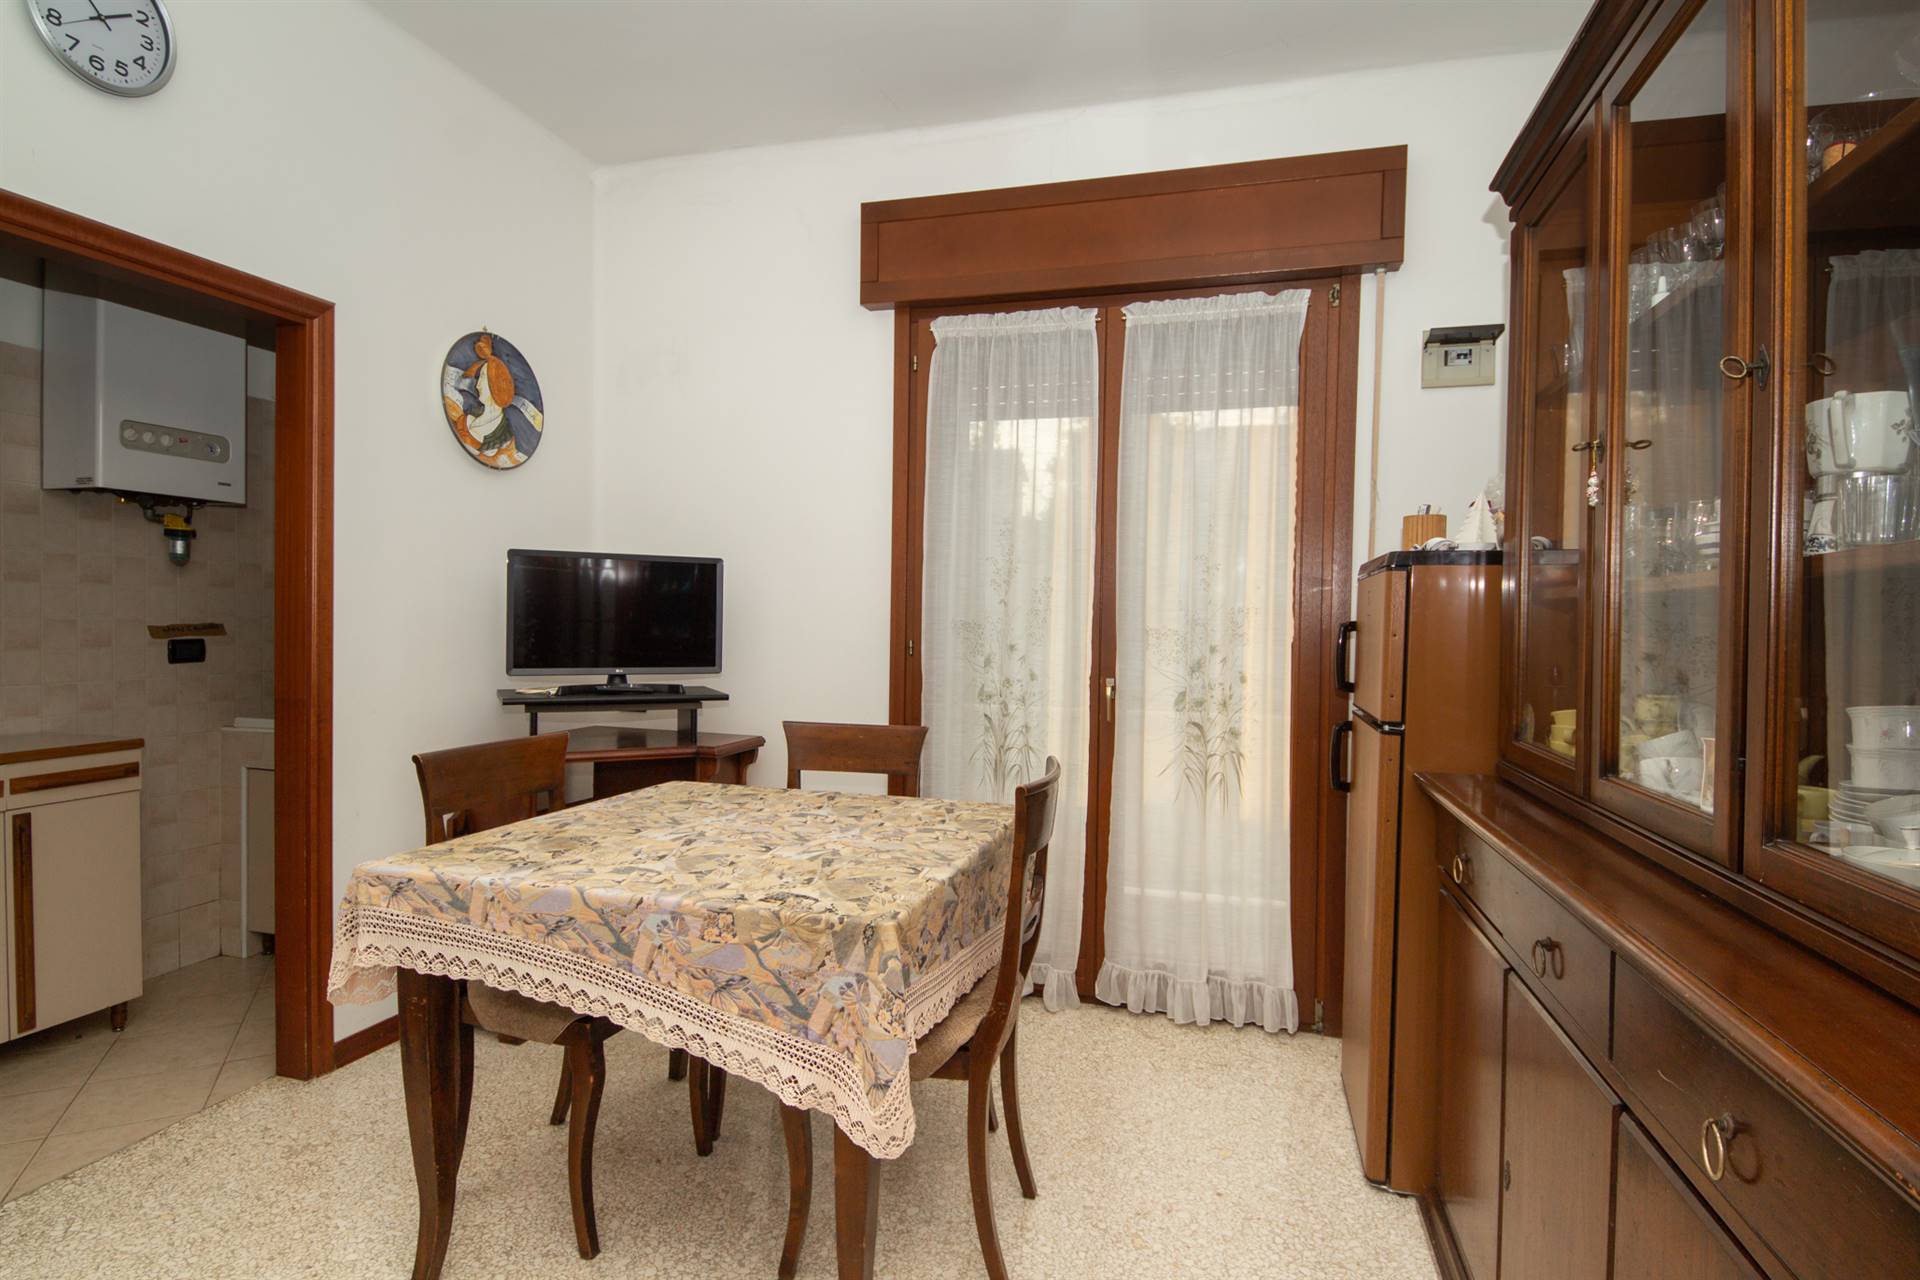 CARPENEDO CÀ ROSSA, VENEZIA, Apartment for sale of 68 Sq. mt., Excellent Condition, Heating Individual heating system, Energetic class: G, placed at 